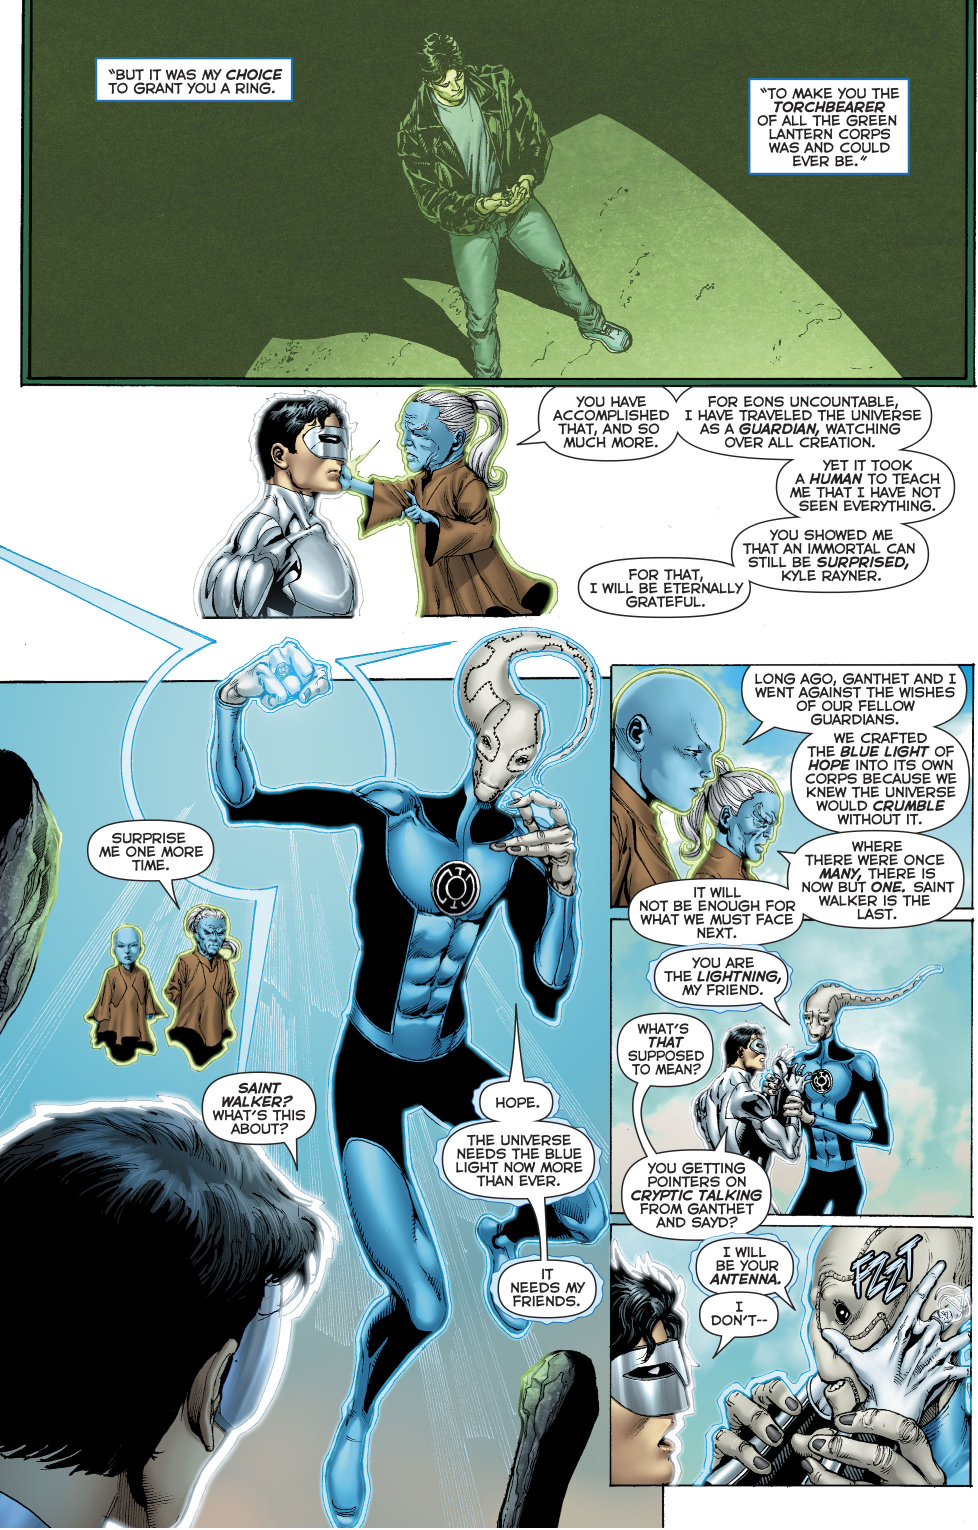 How Kyle Rayner Lost The White Ring